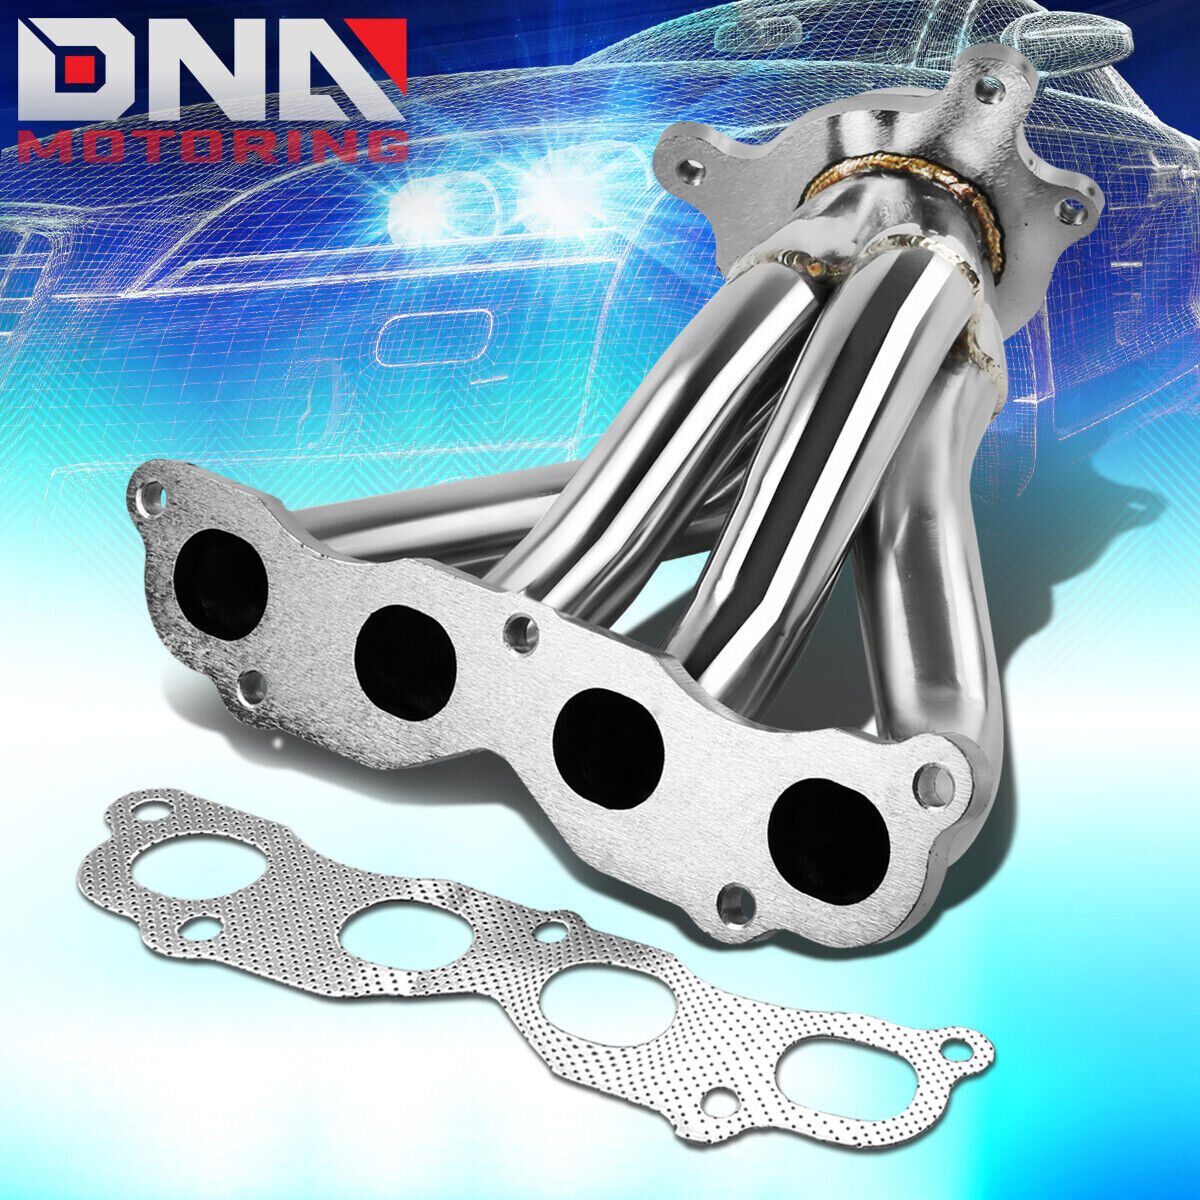 STAINLESS STEEL 4-1 HEADER FOR 02-06 CIVIC Si EP3/RSX DC5 2.0 EXHAUST/MANIFOLD